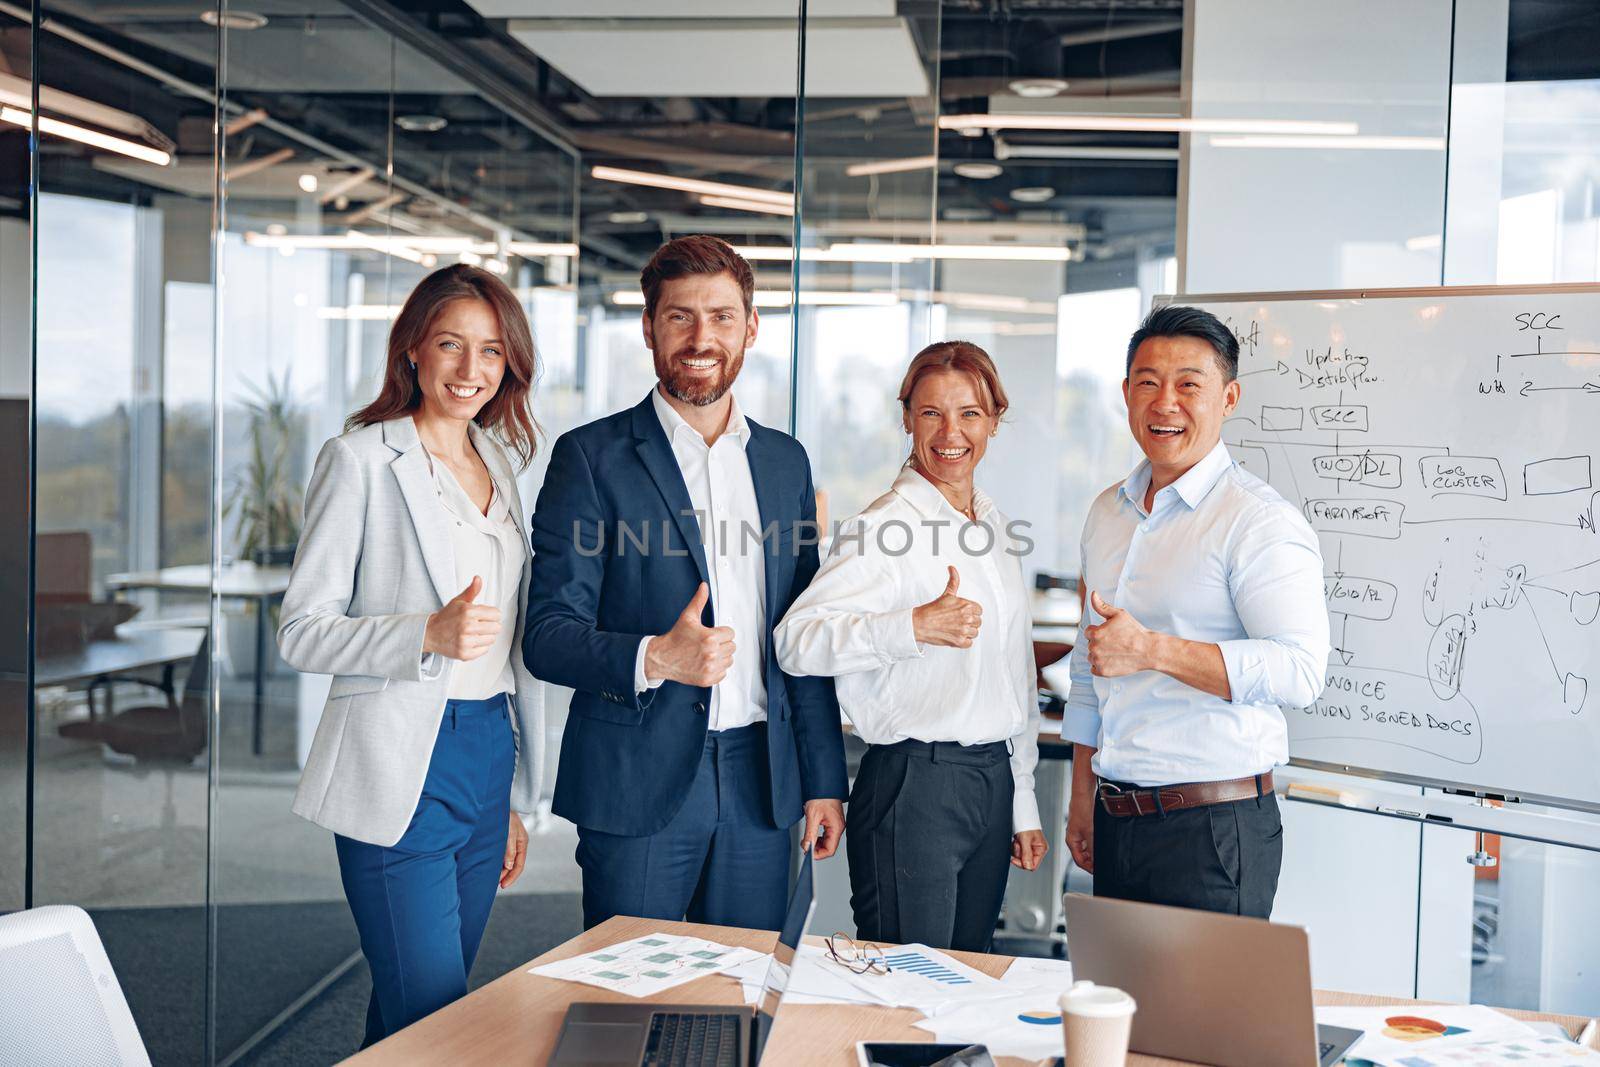 Office employees group showing thumbs up looking at camera, happy professional multicultural team.